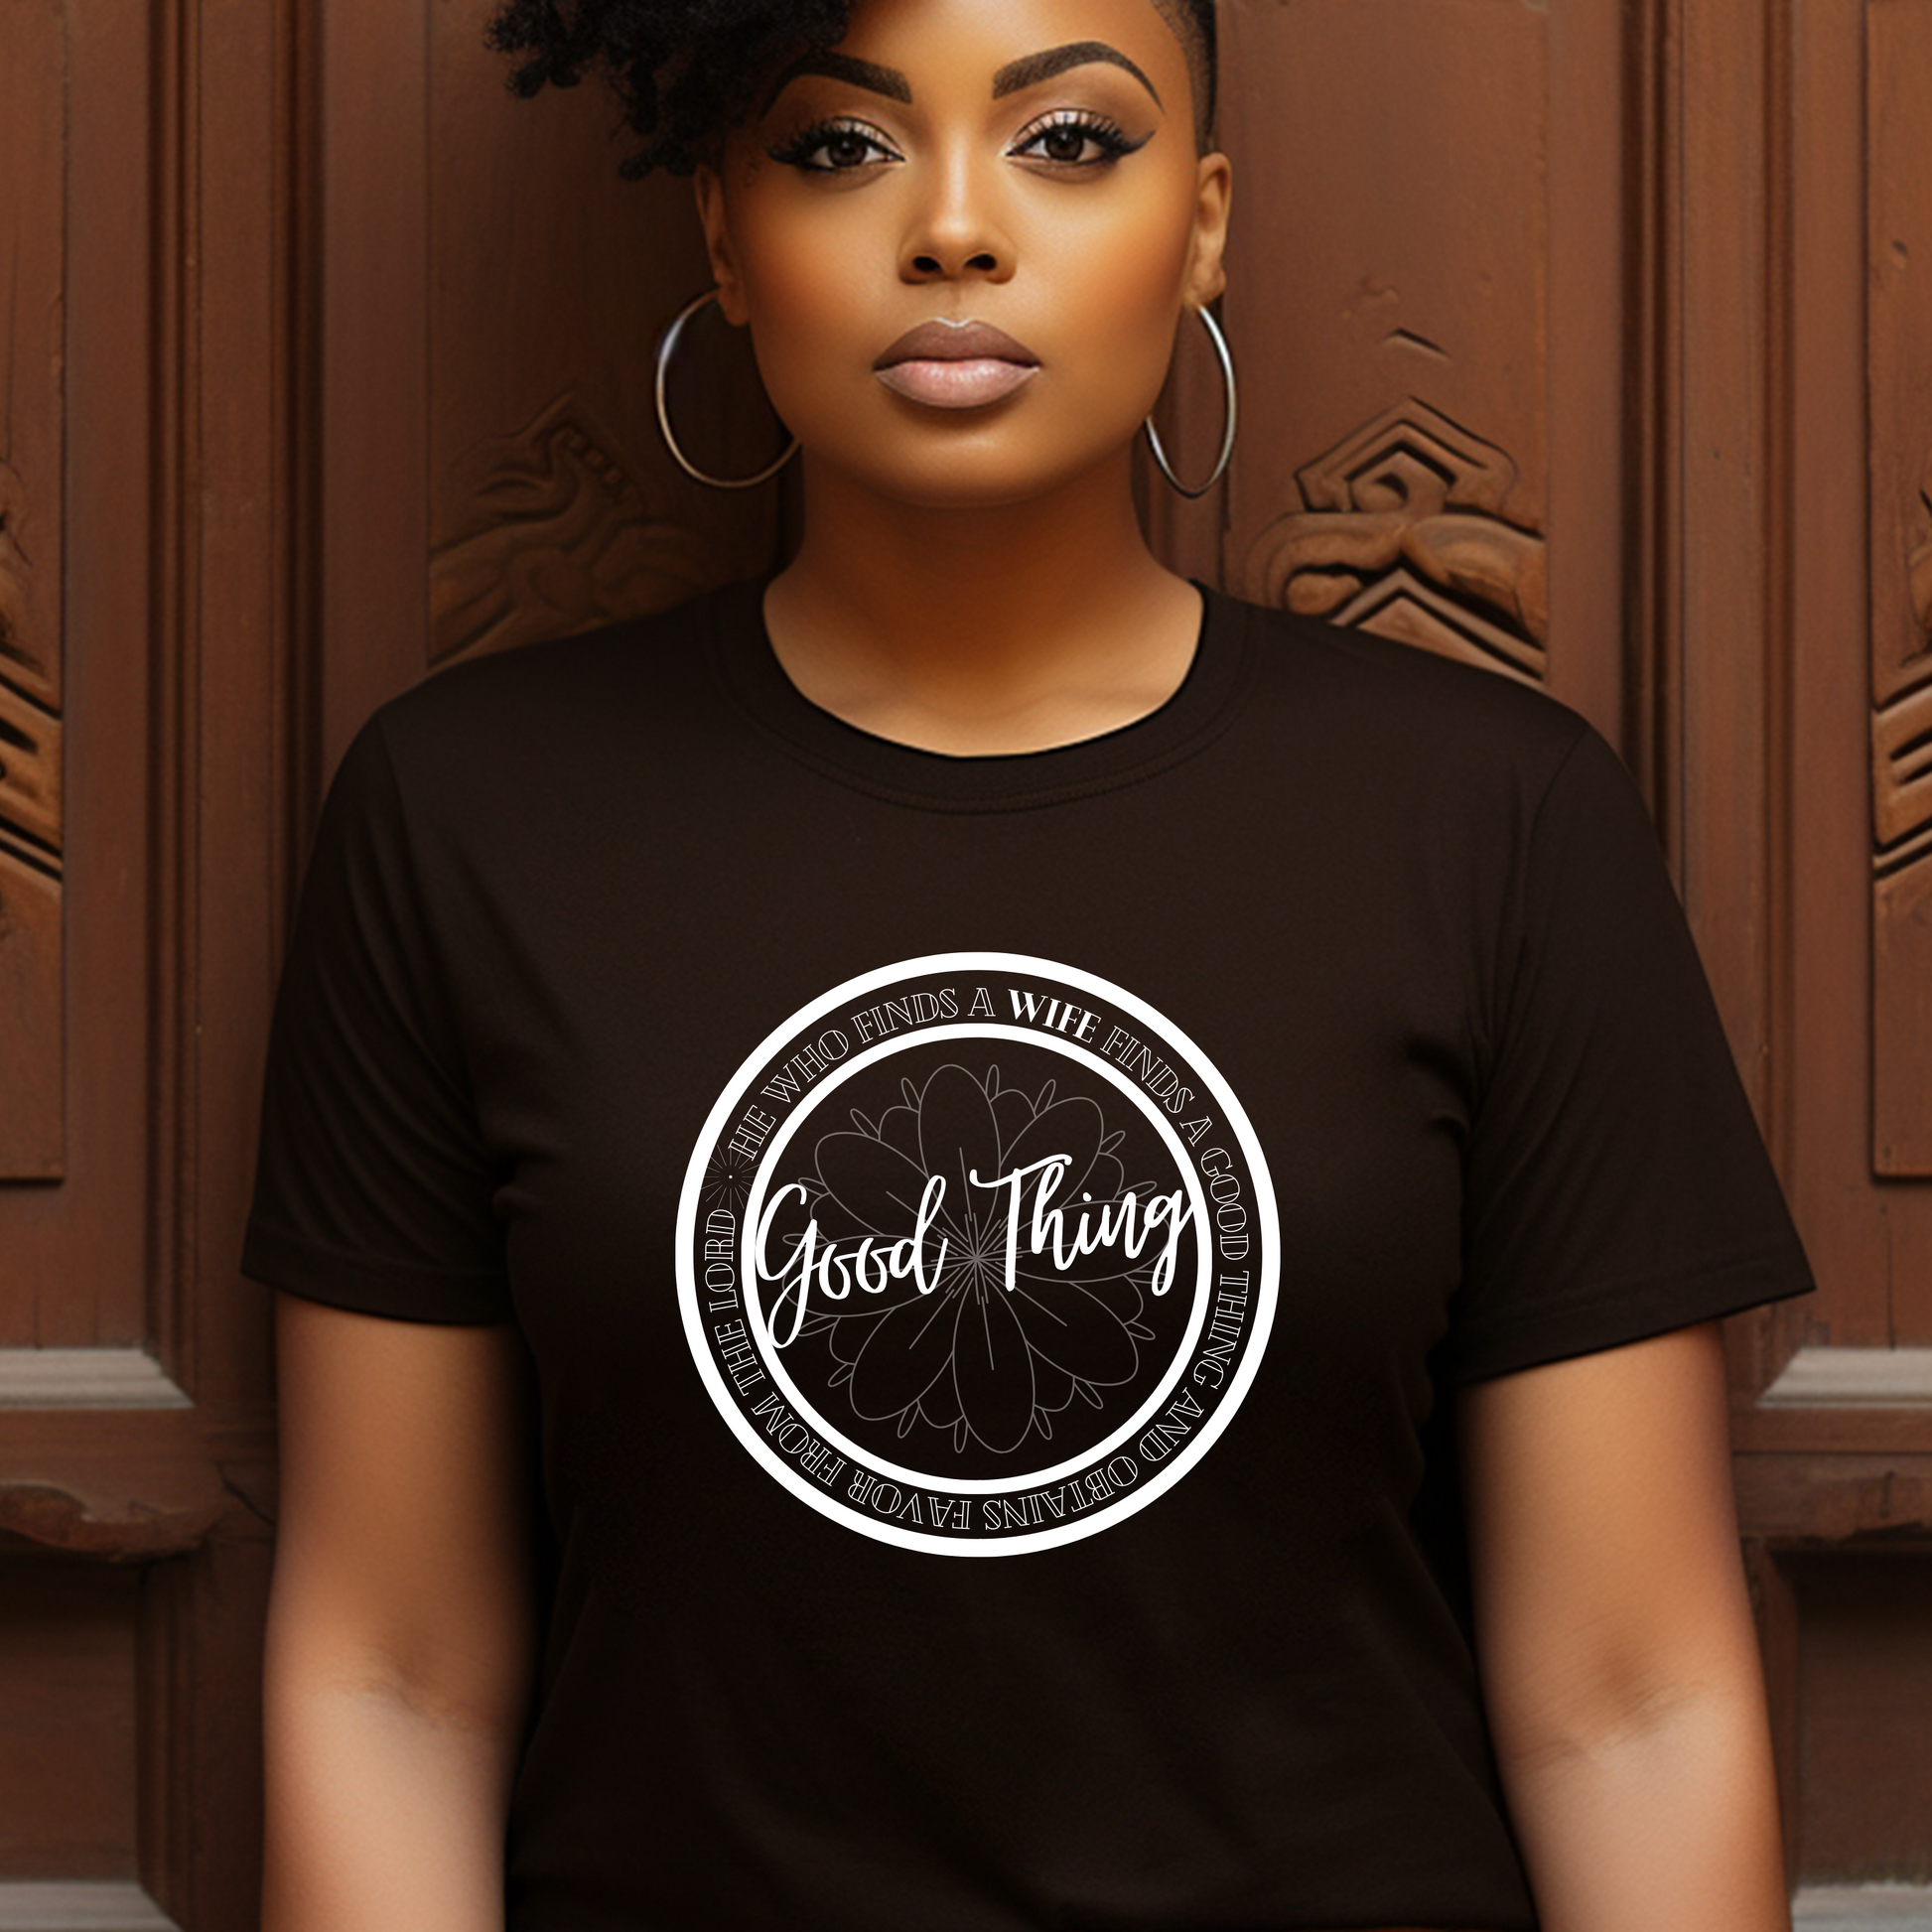 Stylish chocolate 'Good Thing' T-shirt from Triumph Tees, inspired by Proverbs 18:22. This faith-driven apparel is a trendy way to express your belief and the favor of God.